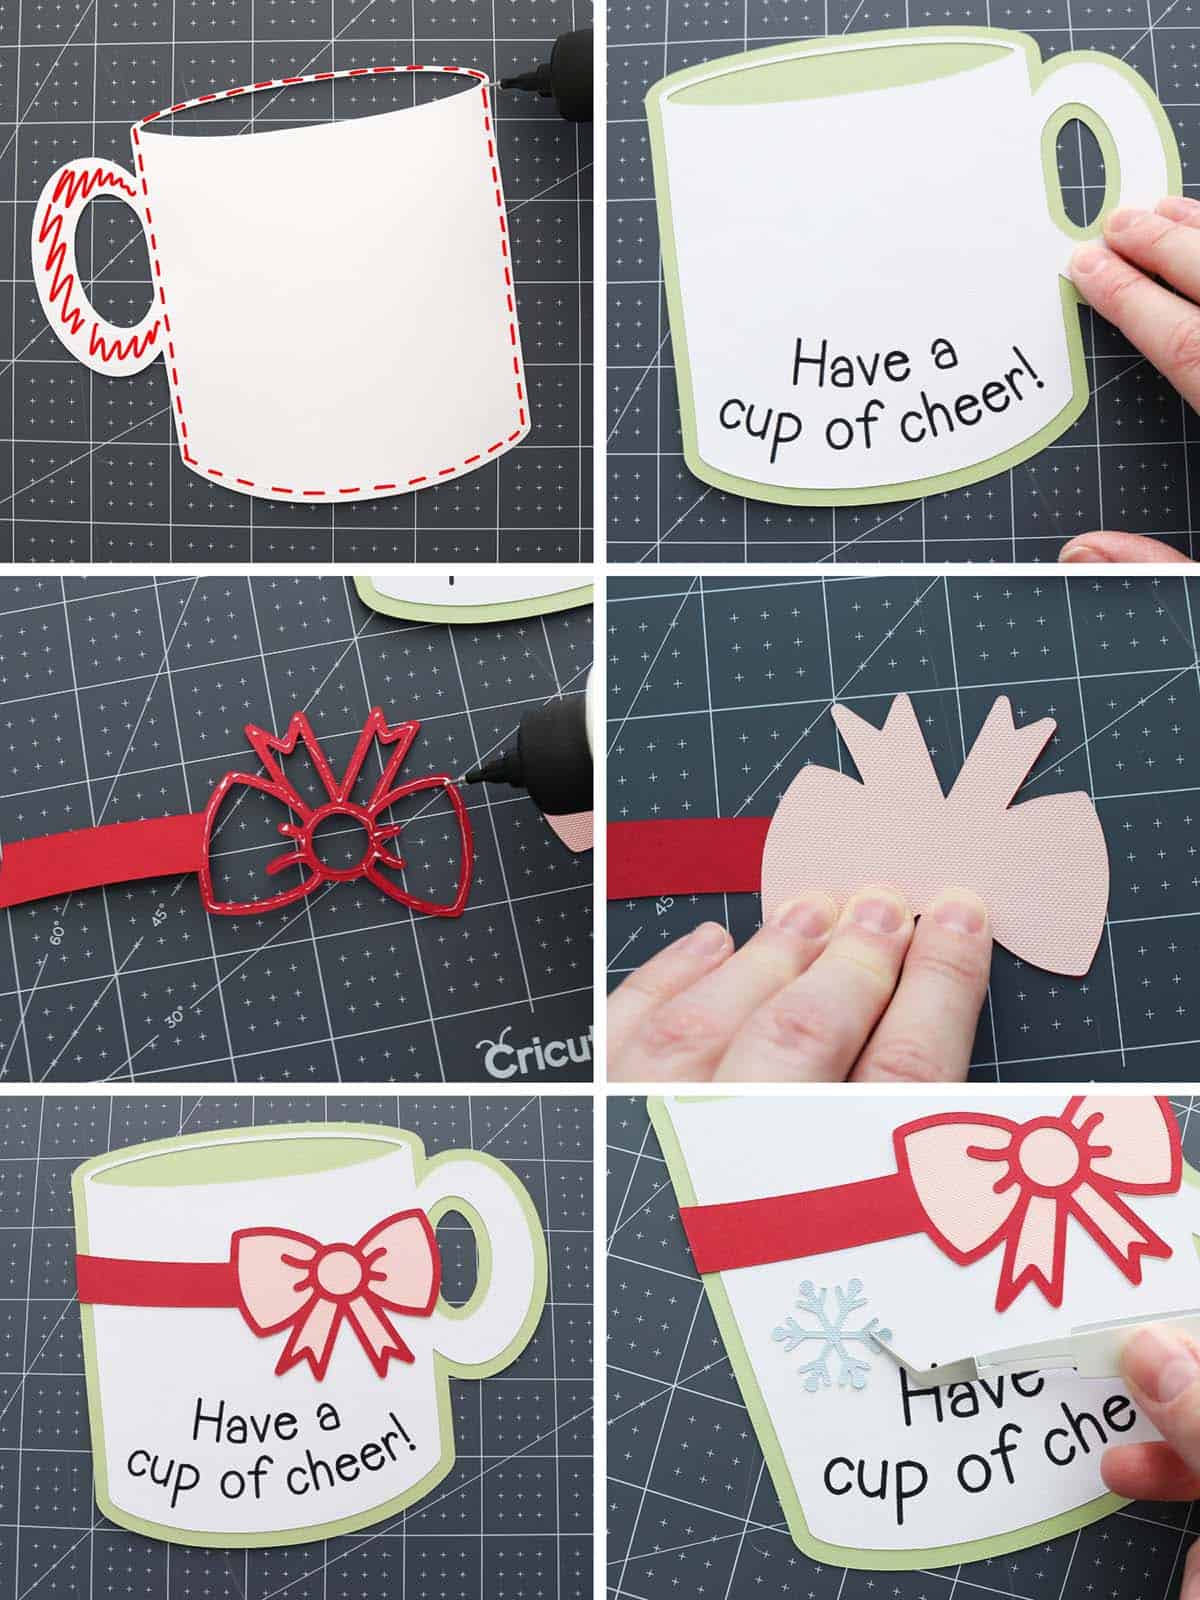 how to make a hot cocoa paper craft gift step by step